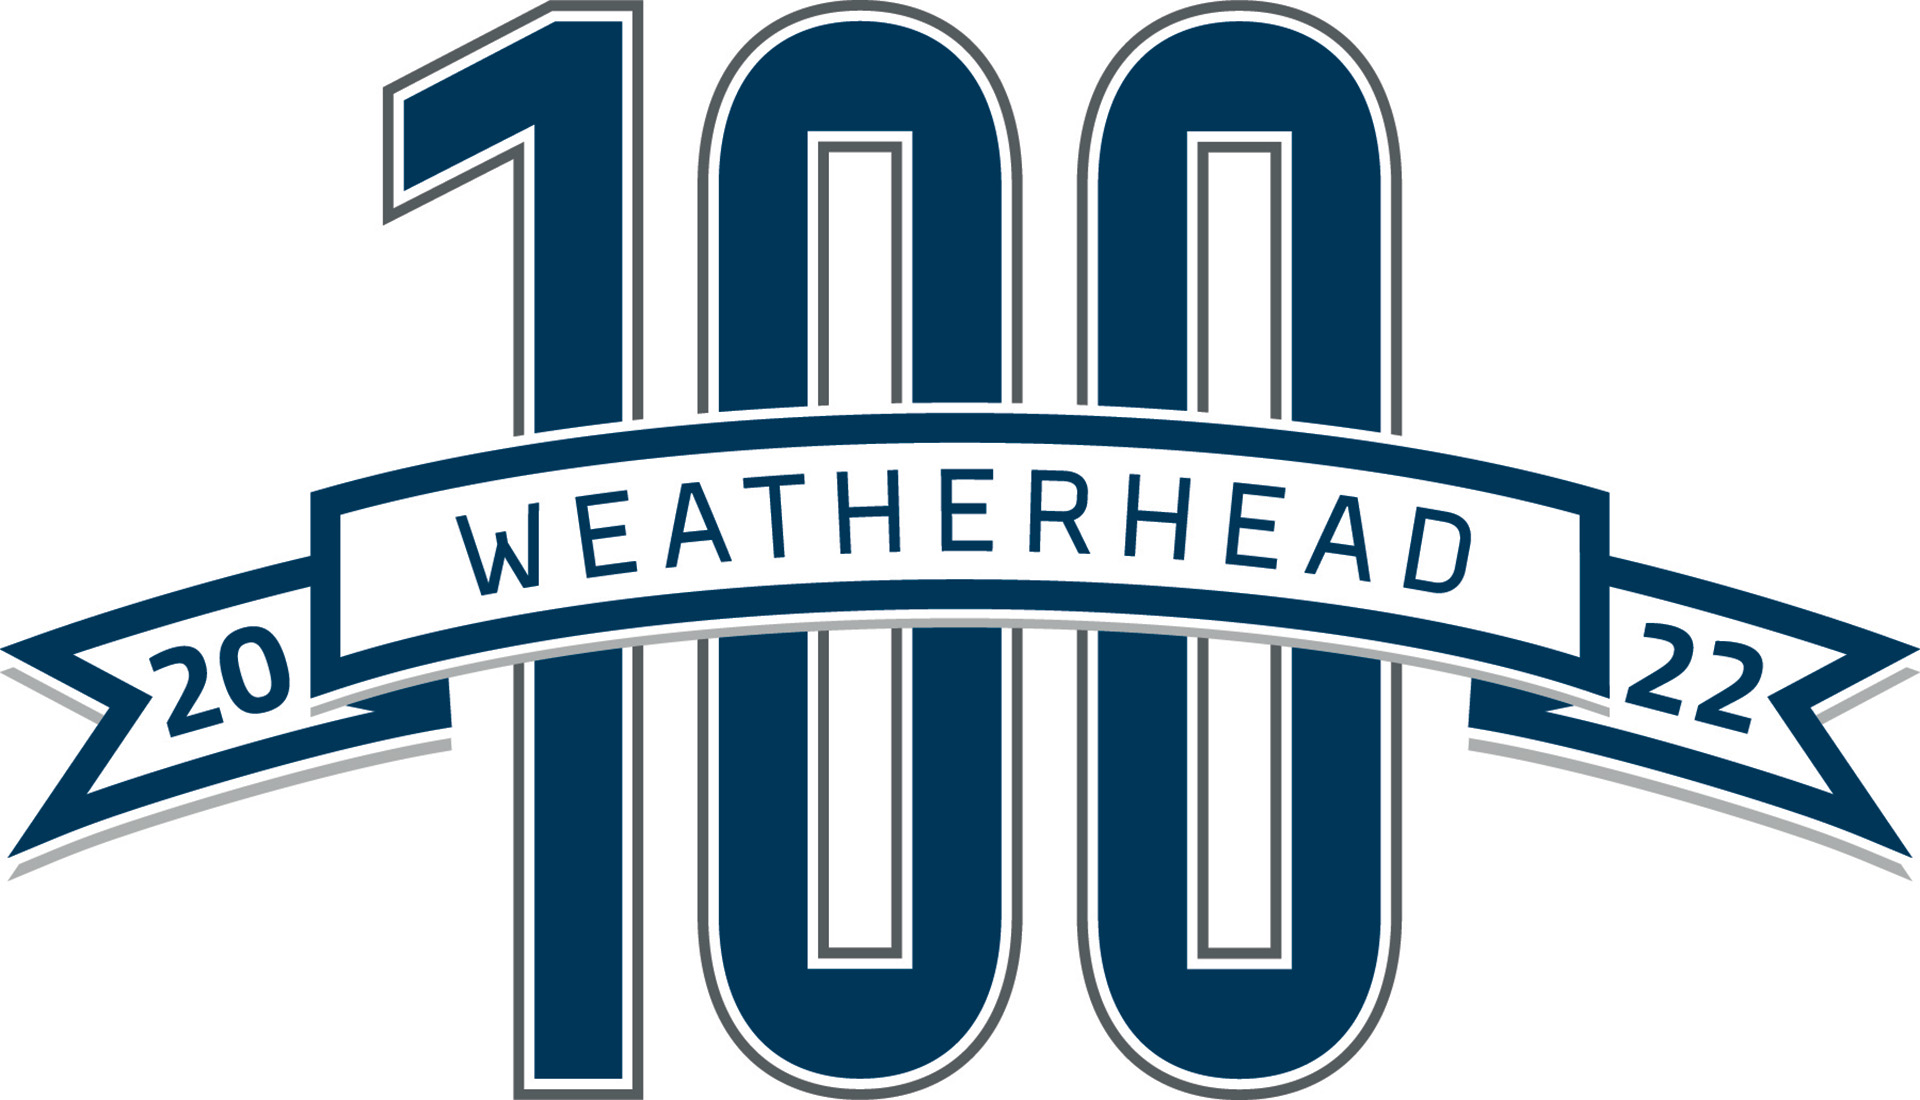 Starfish Computer Corporation recognized as One of the Fastest Growing Companies with First Weatherhead 100 Award